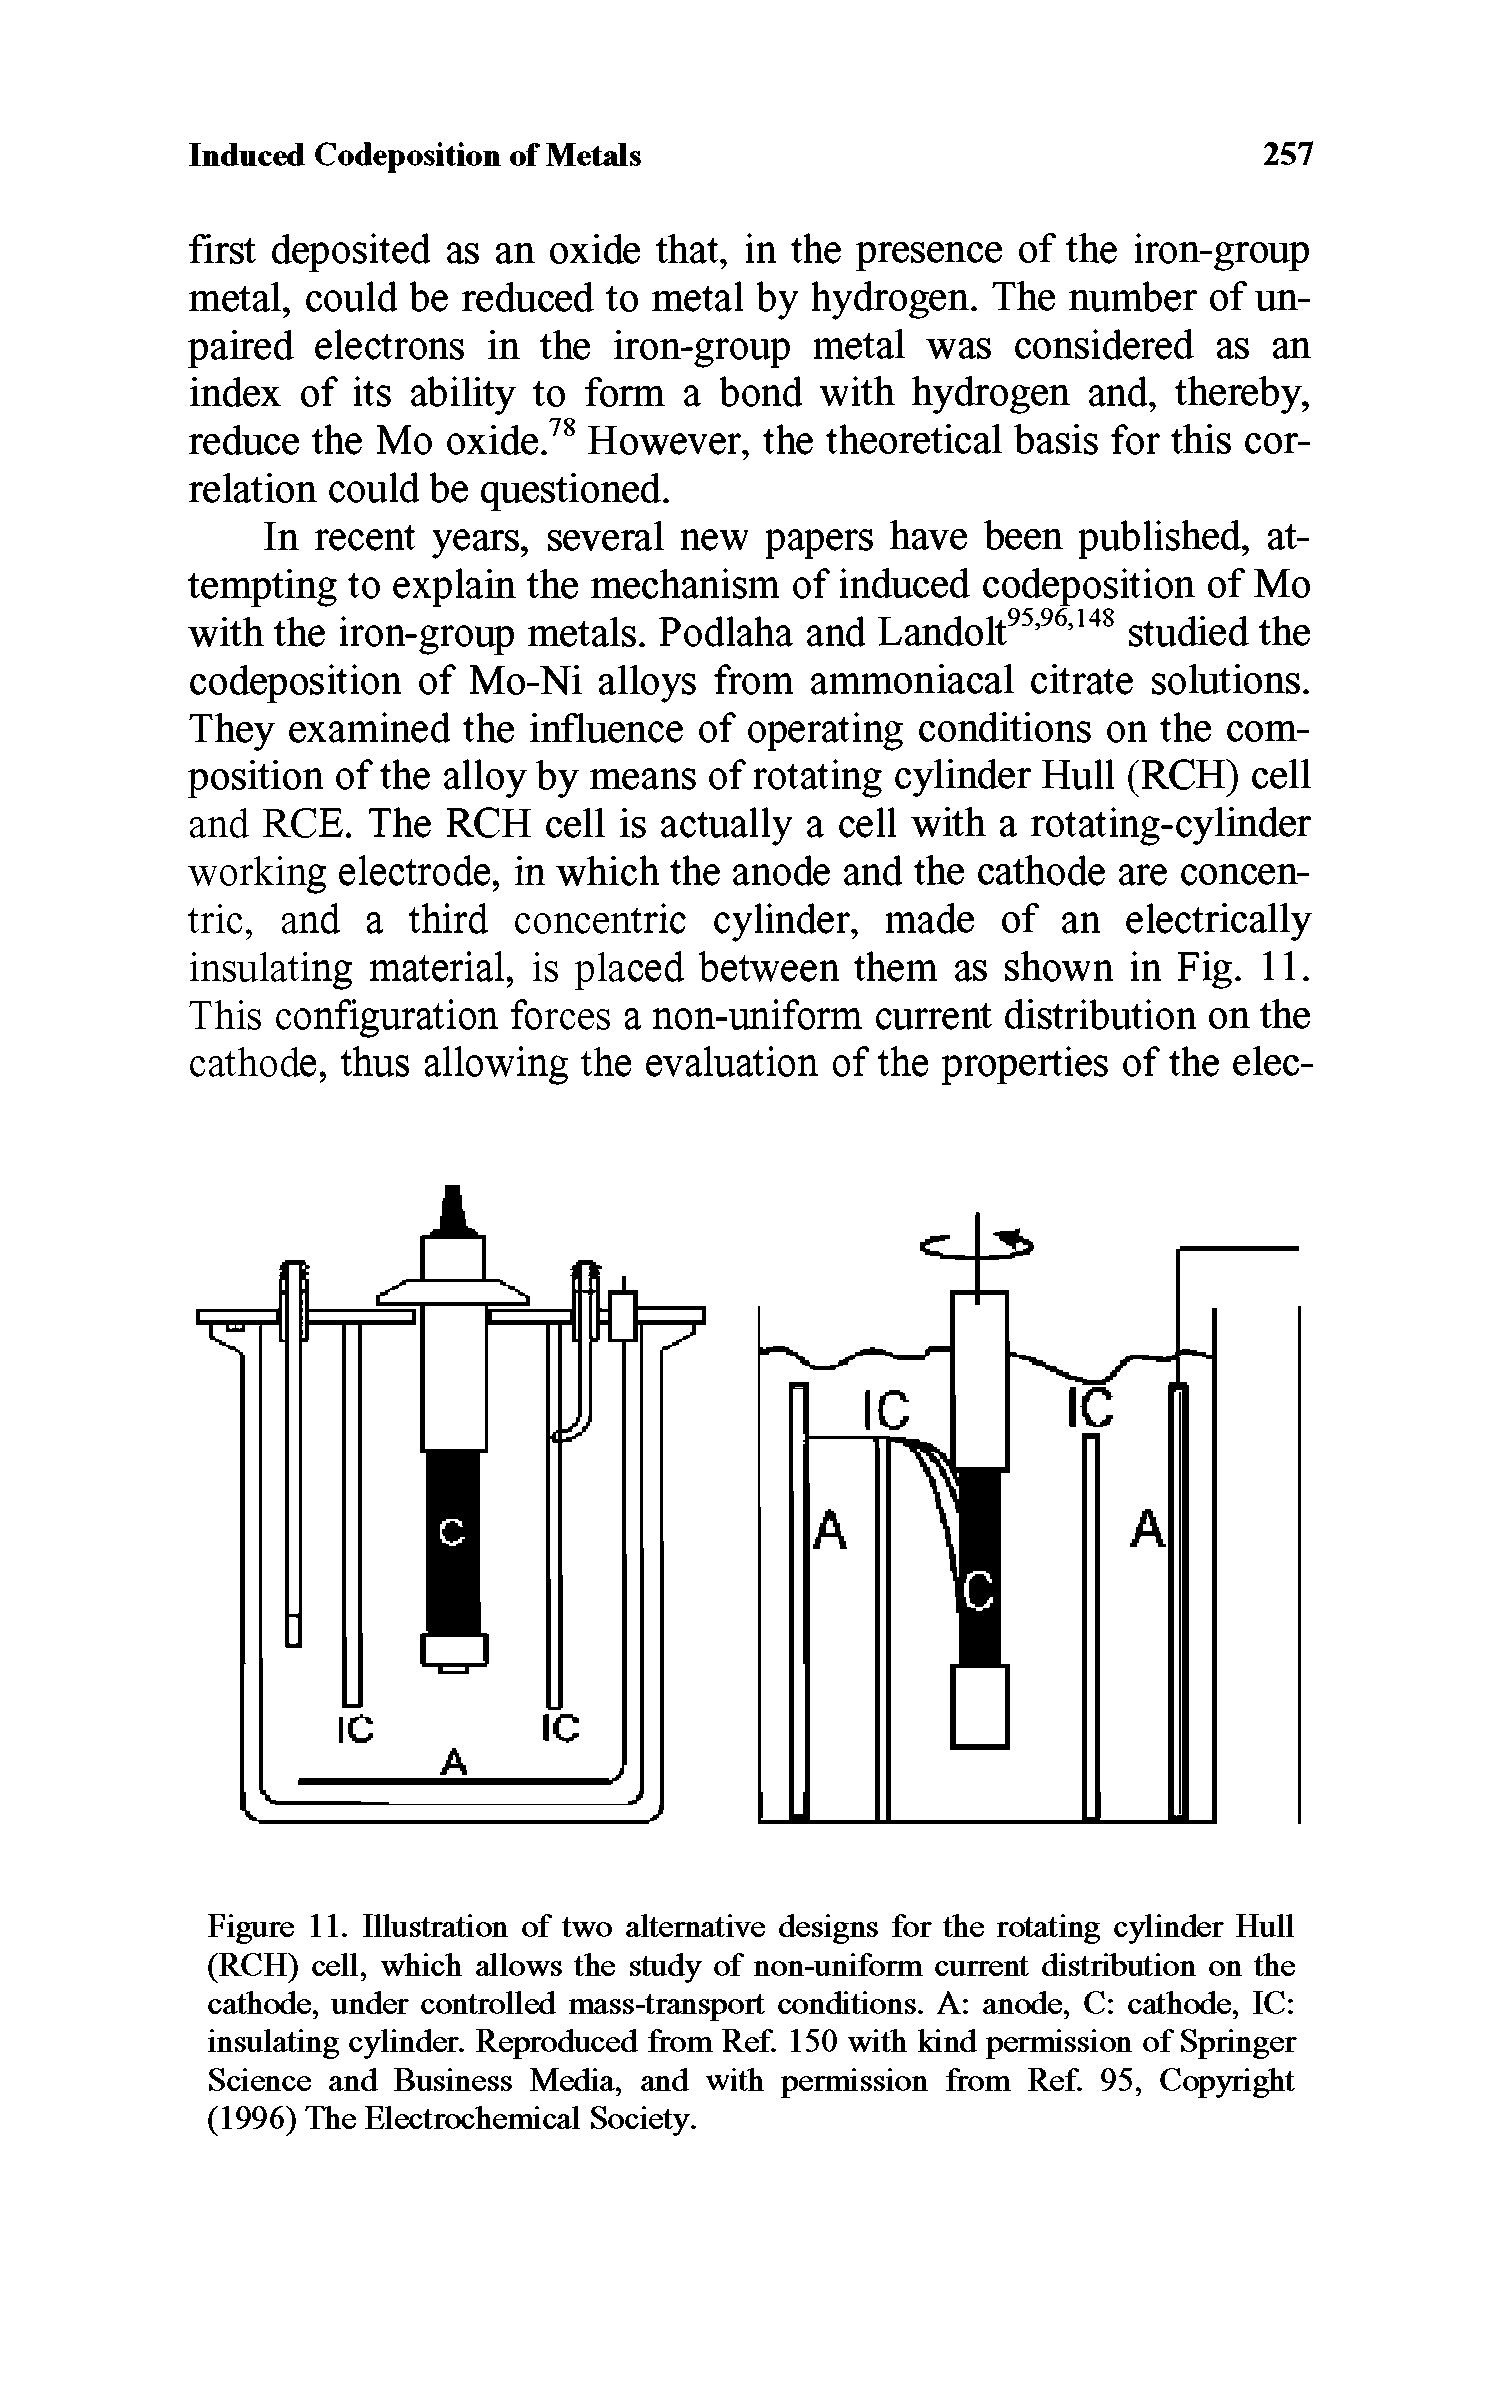 Figure 11. Illustration of two alternative designs for the rotating cylinder Hull (RCH) cell, which allows the study of non-uniform current distribution on the cathode, under controlled mass-transport conditions. A anode, C cathode, IC insulating cylinder. Reproduced from Ref. 150 with kind permission of Springer Science and Business Media, and with permission from Ref. 95, Copyright (1996) The Electrochemical Society.